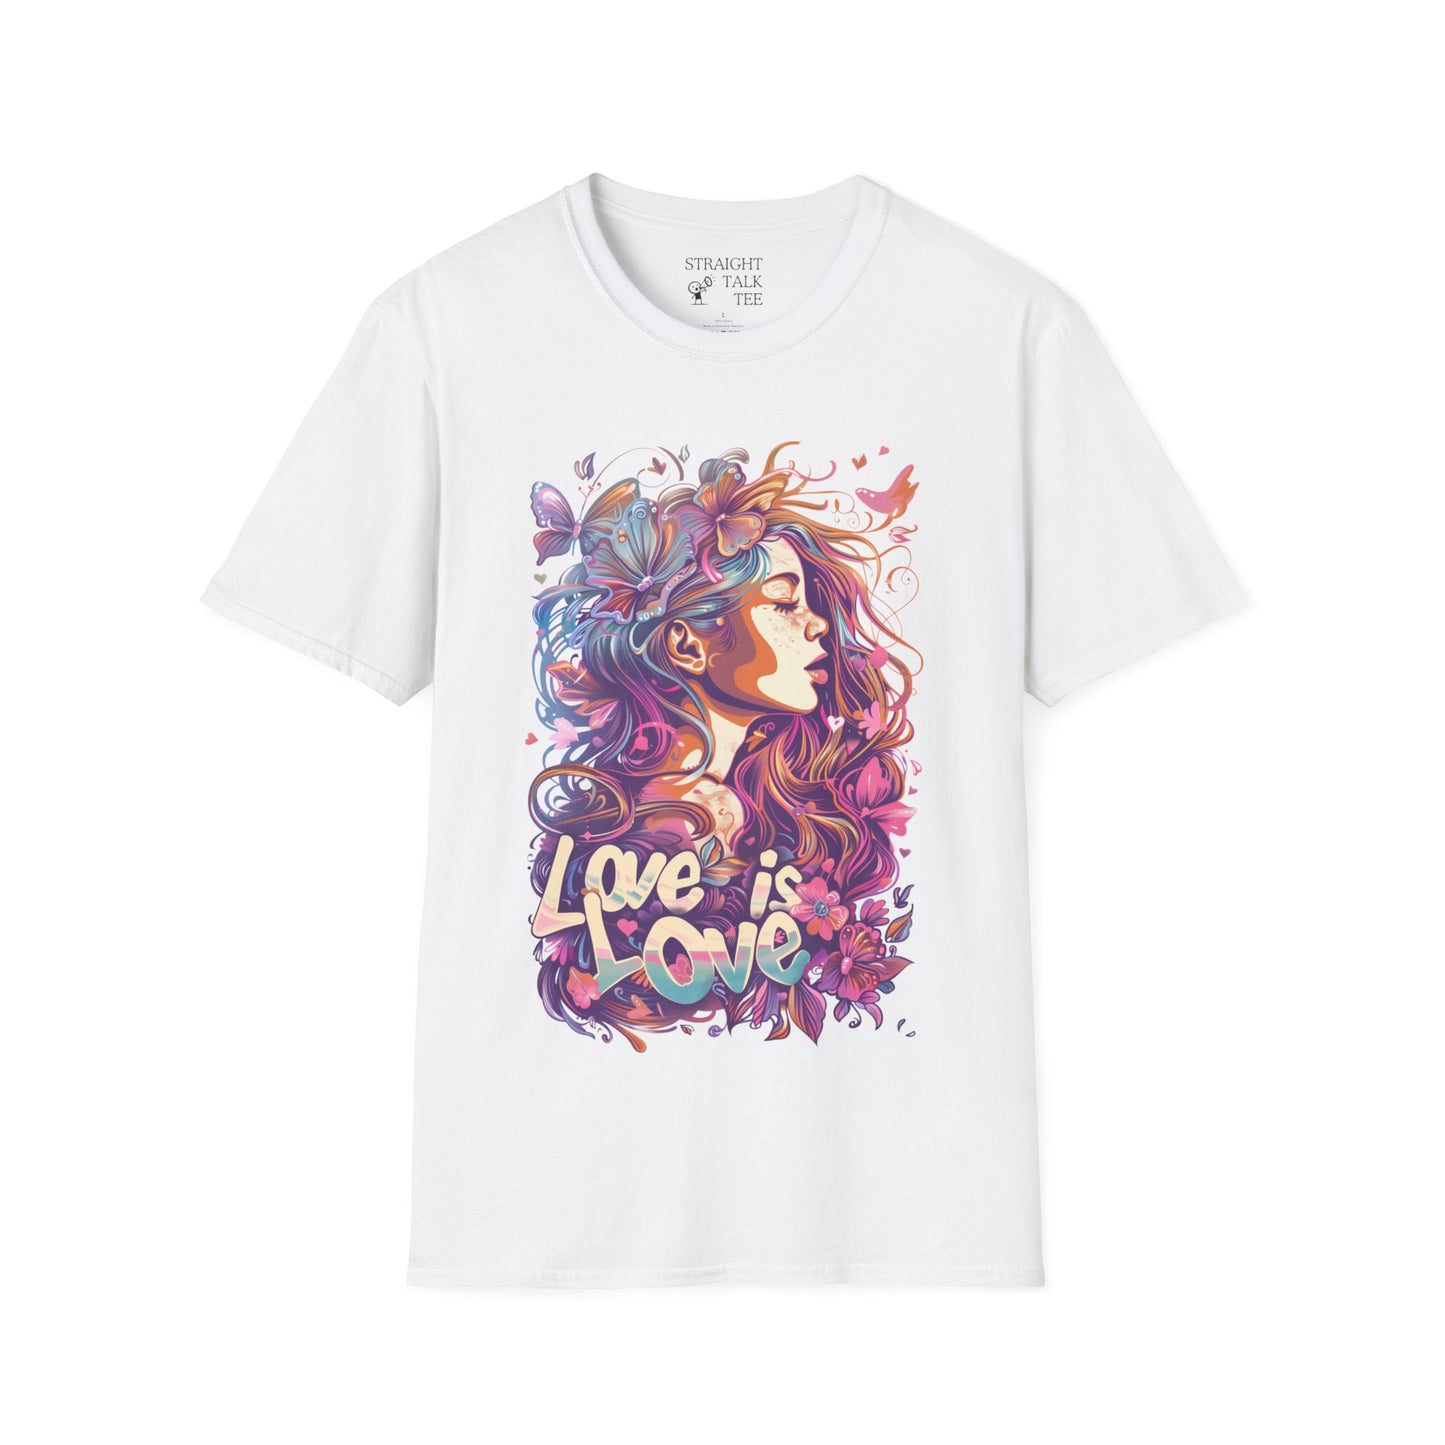 Love is Love T-Shirt | Wear Your Pride Shirt!